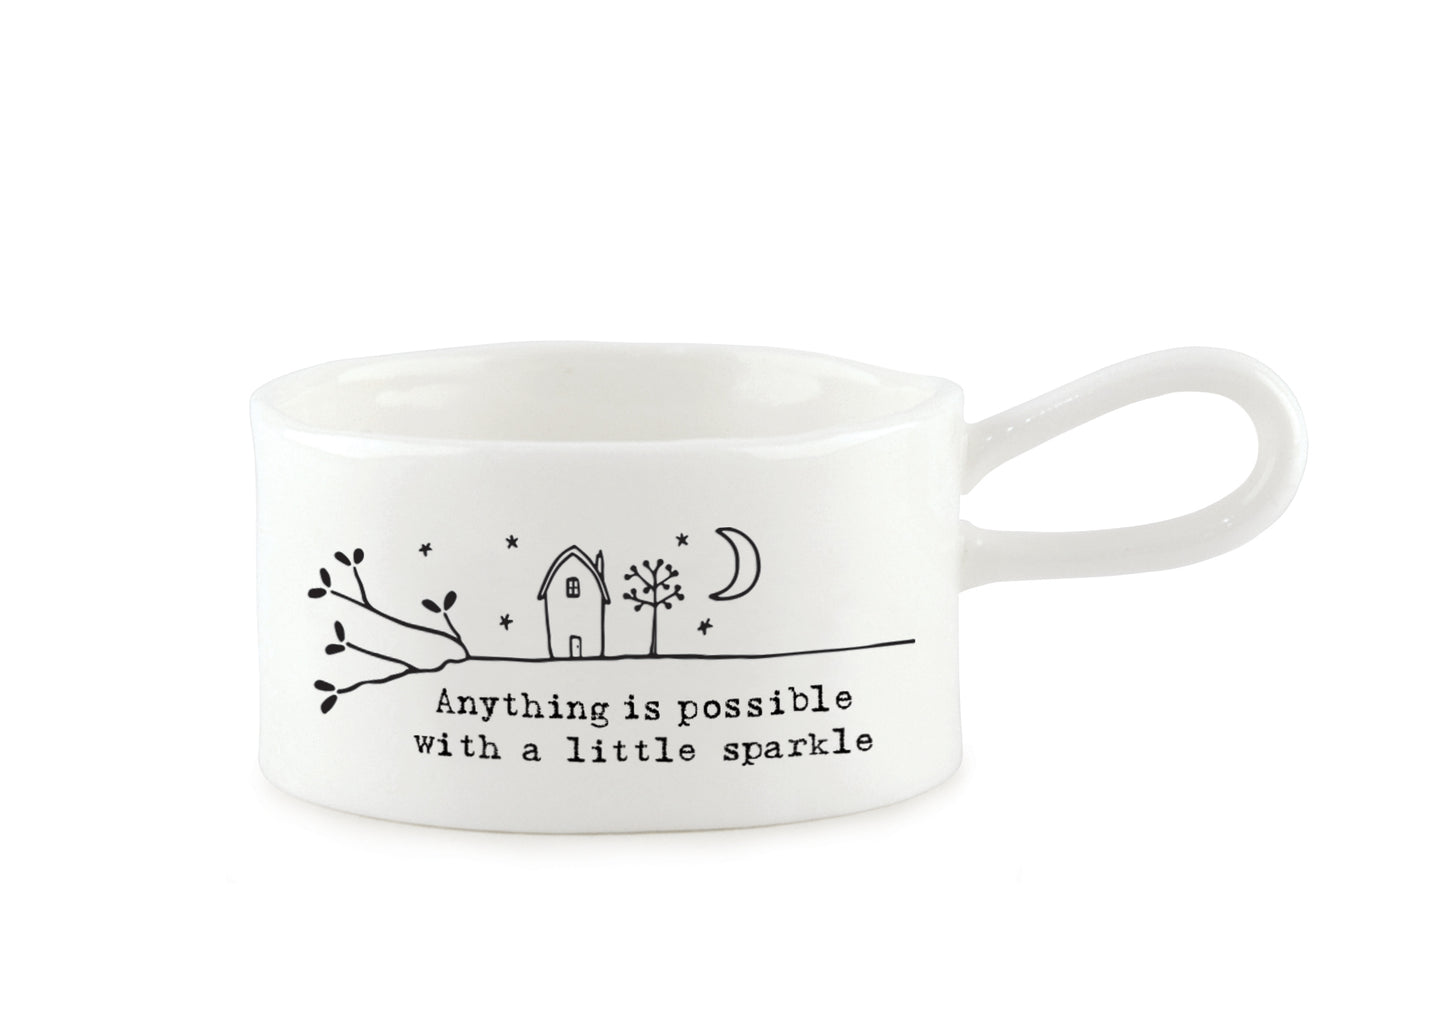 East Of India Anything Is Possible With Sparkle Handled Tea Light Holder In Gift Box